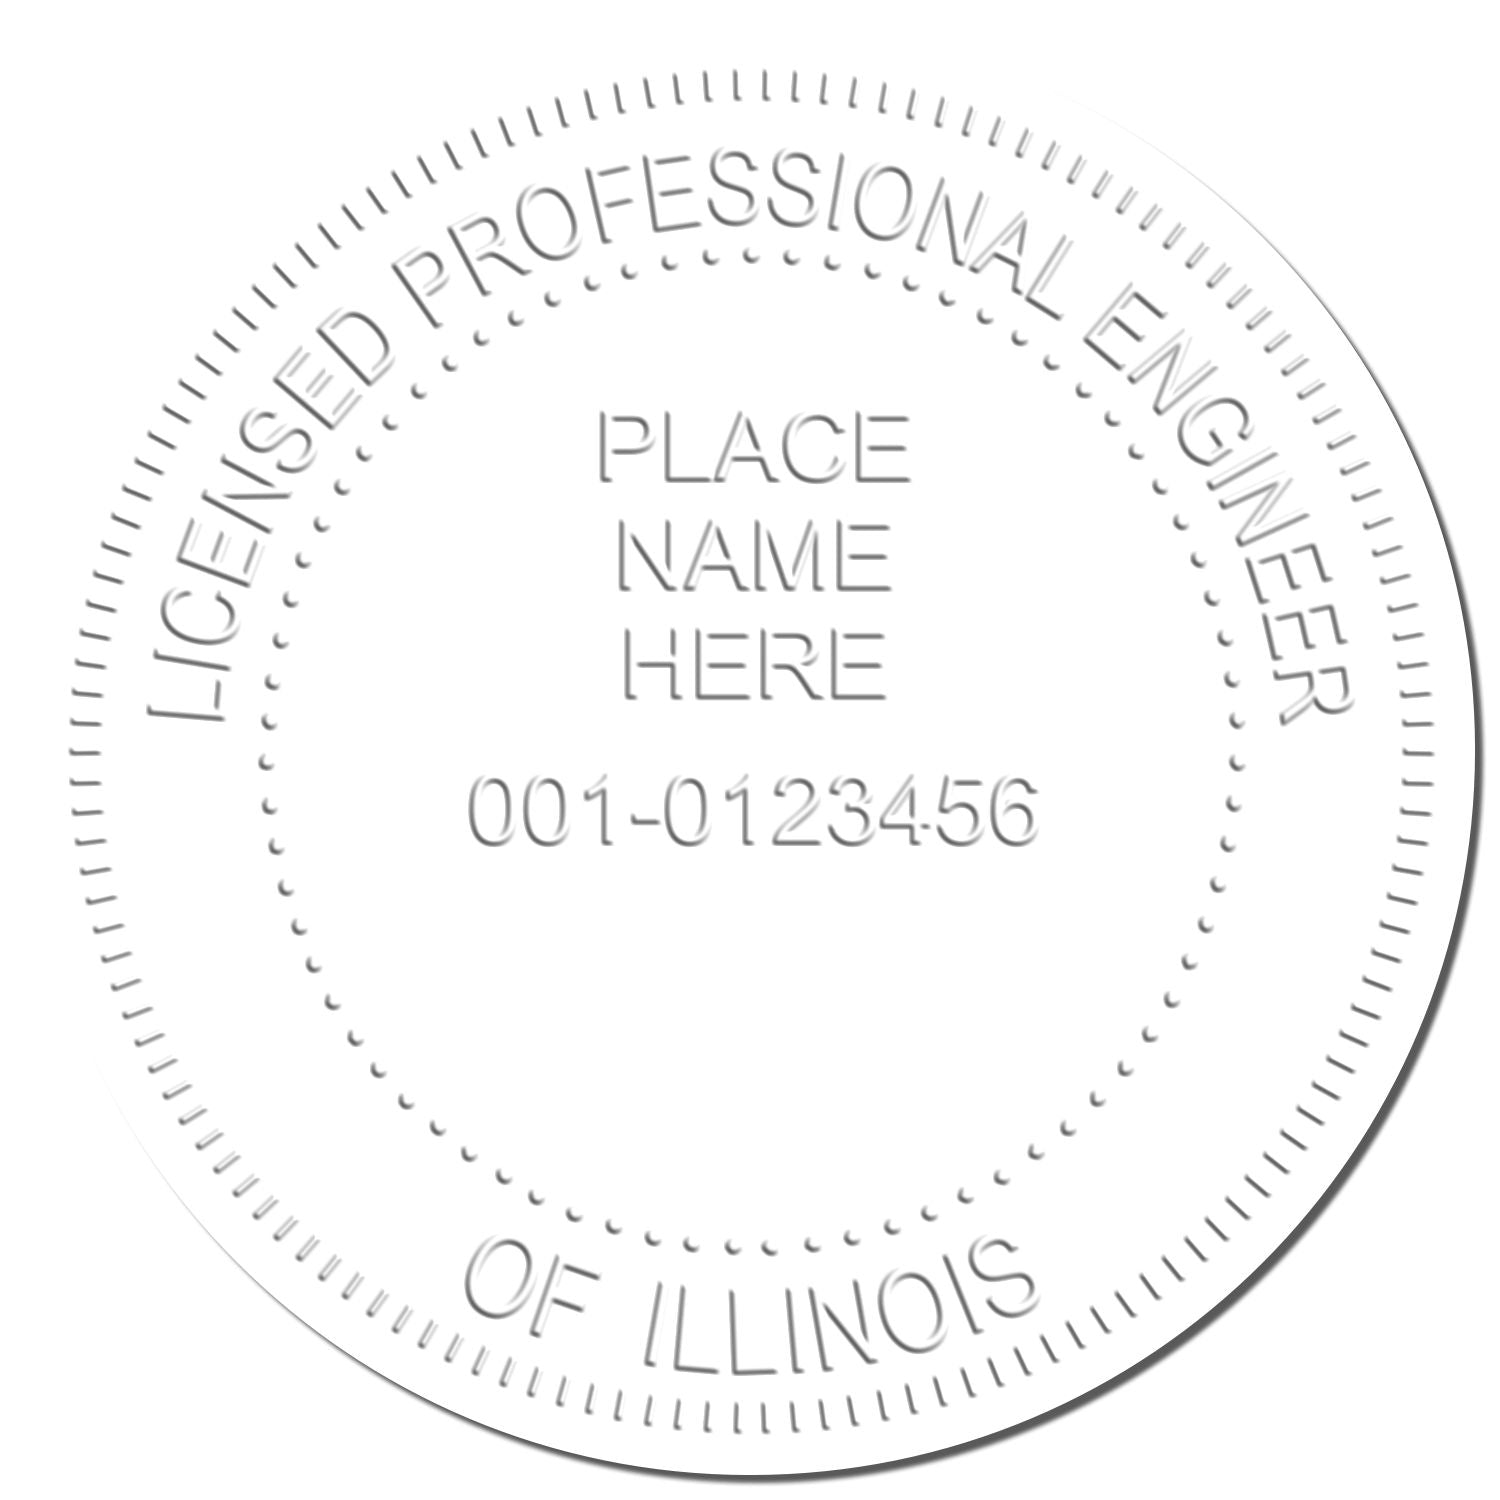 The main image for the Illinois Engineer Desk Seal depicting a sample of the imprint and electronic files